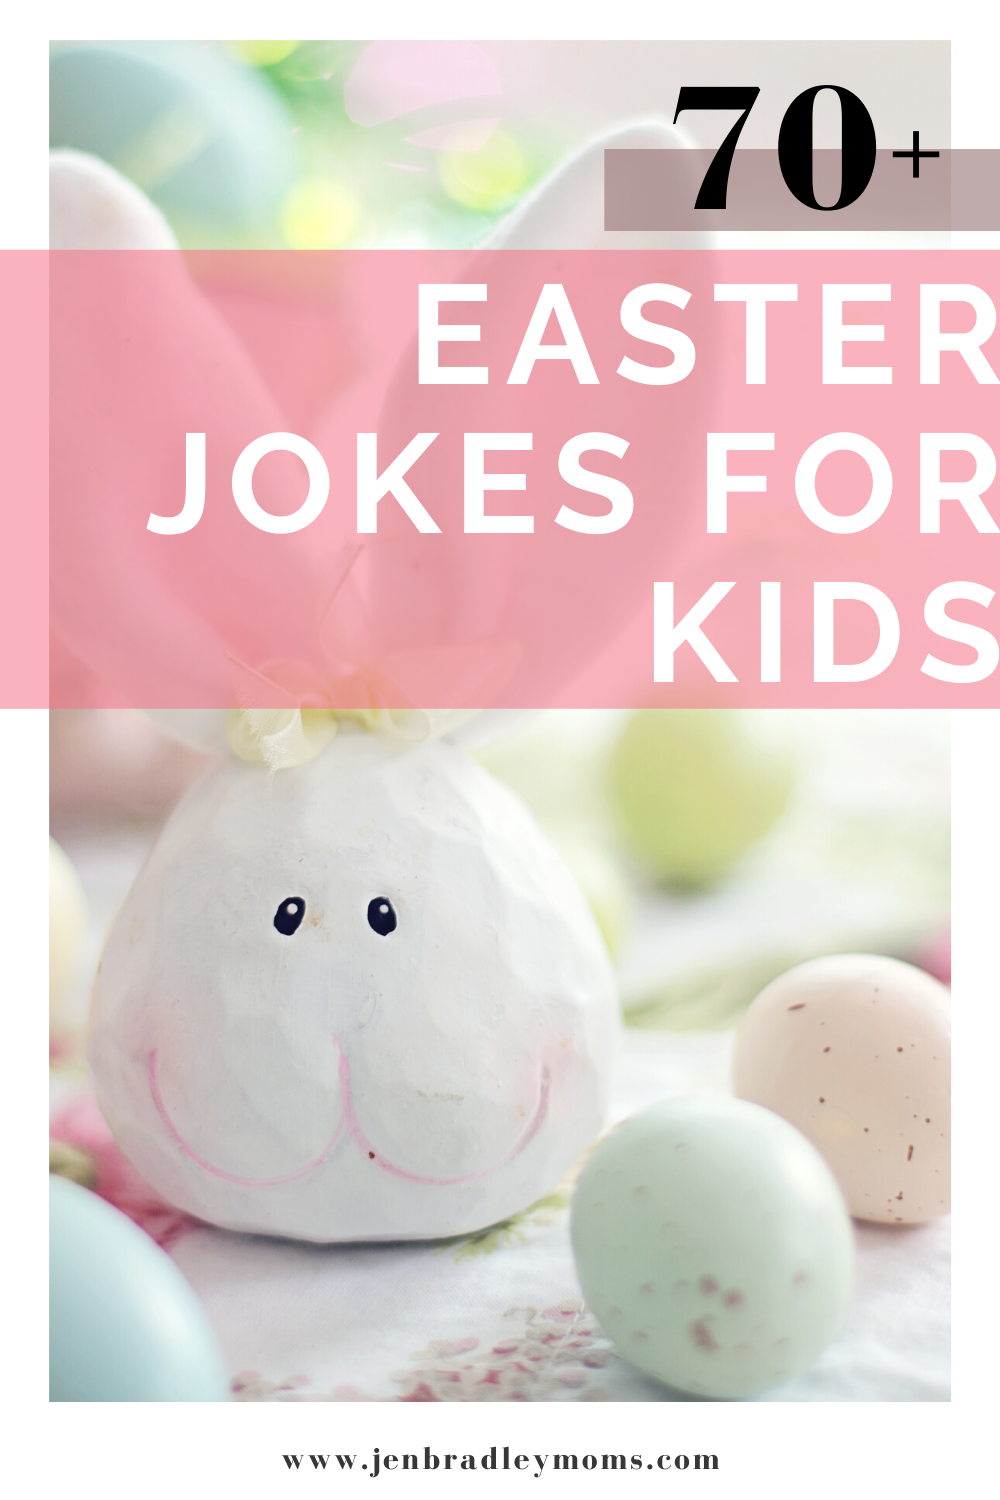 70+ Fun and Hilarious Easter Jokes for Kids to Tell